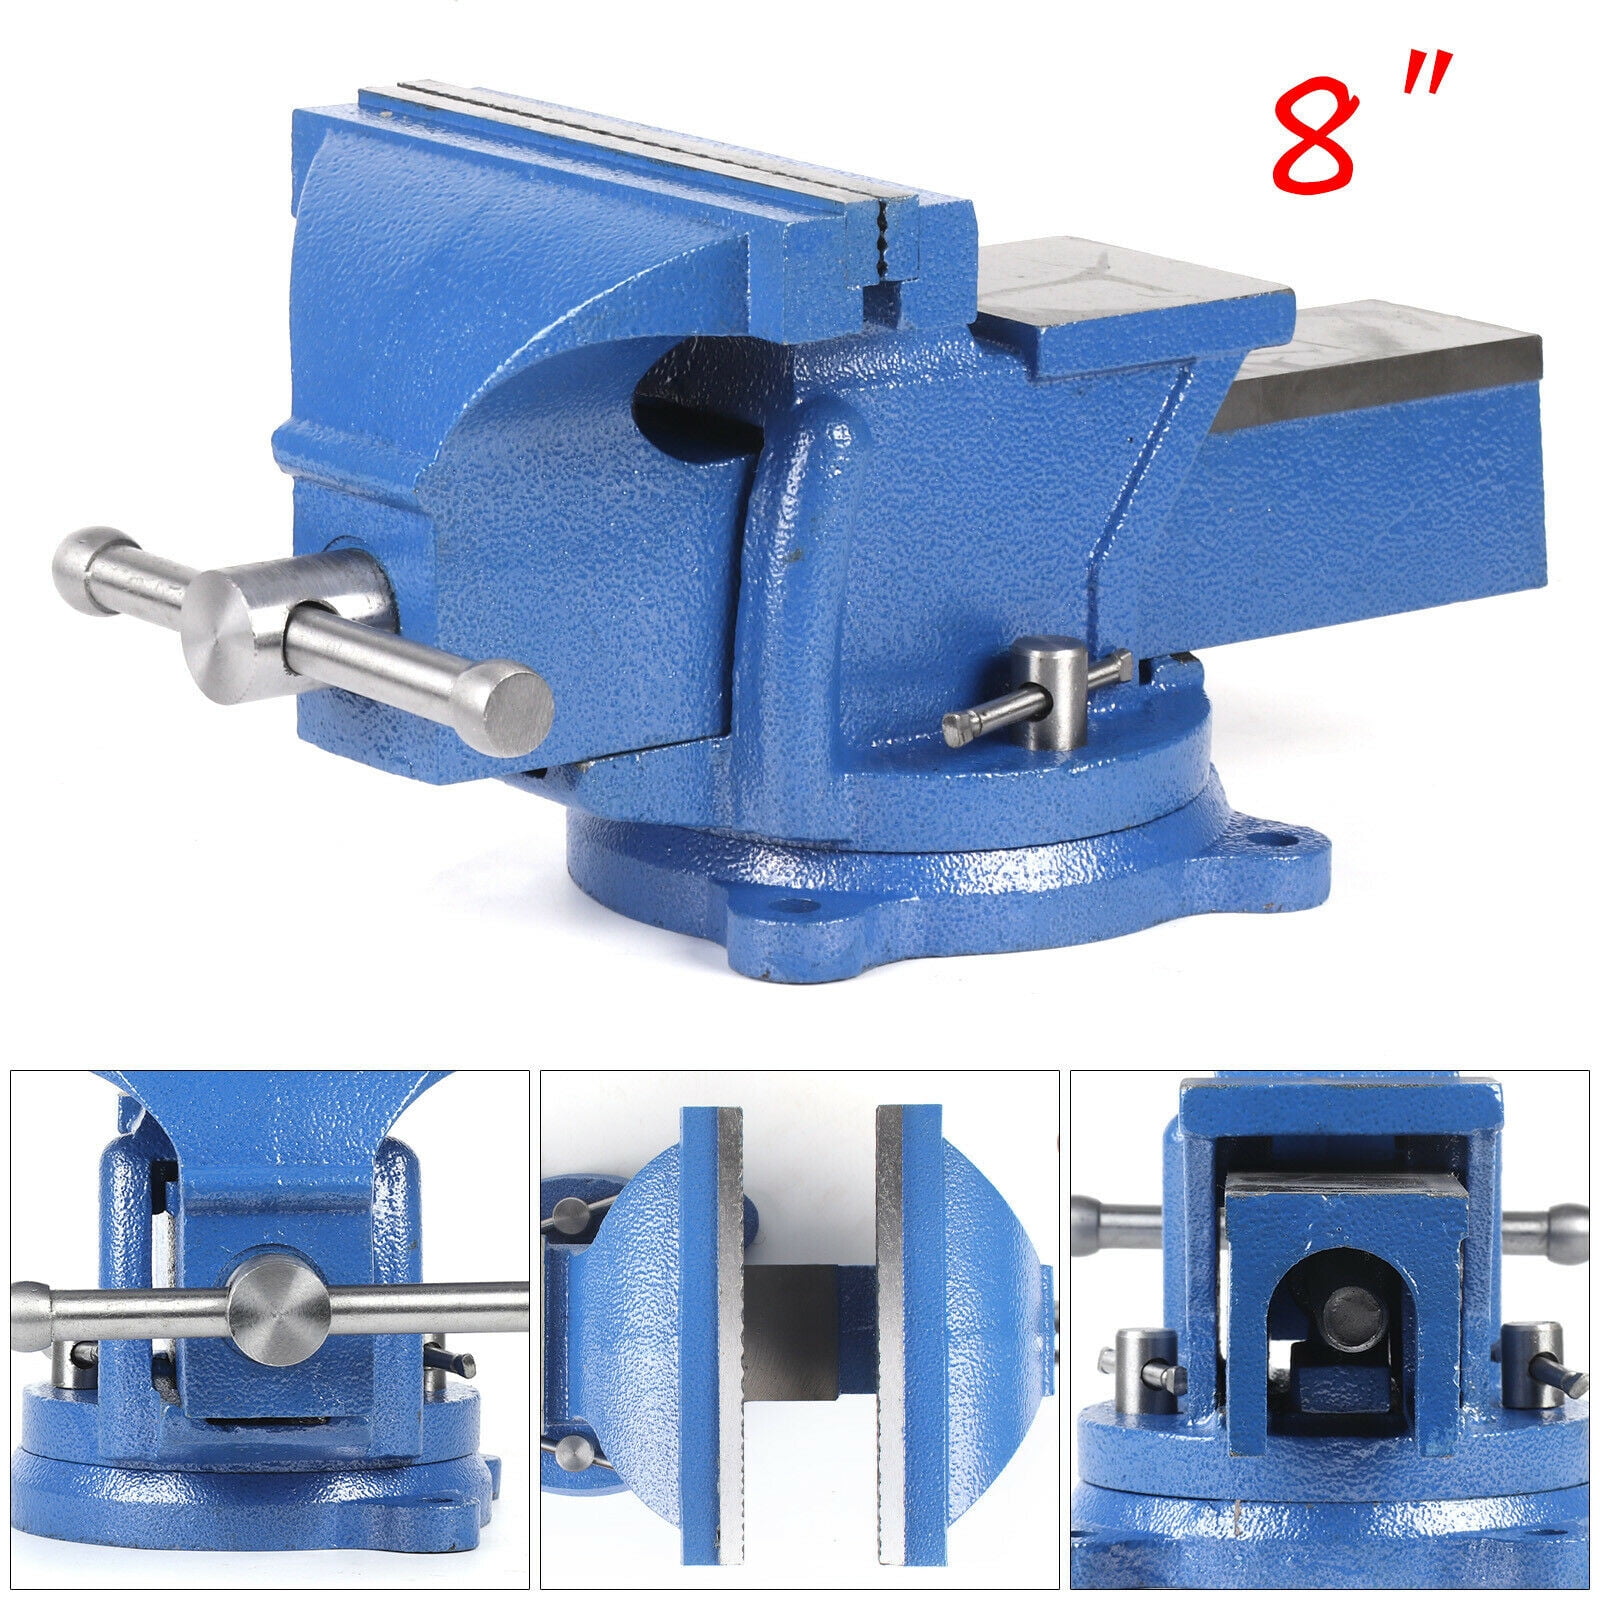 4" Bench Vise with Anvil Swivel Locking Base Table top Clamp Heavy Duty Steel 